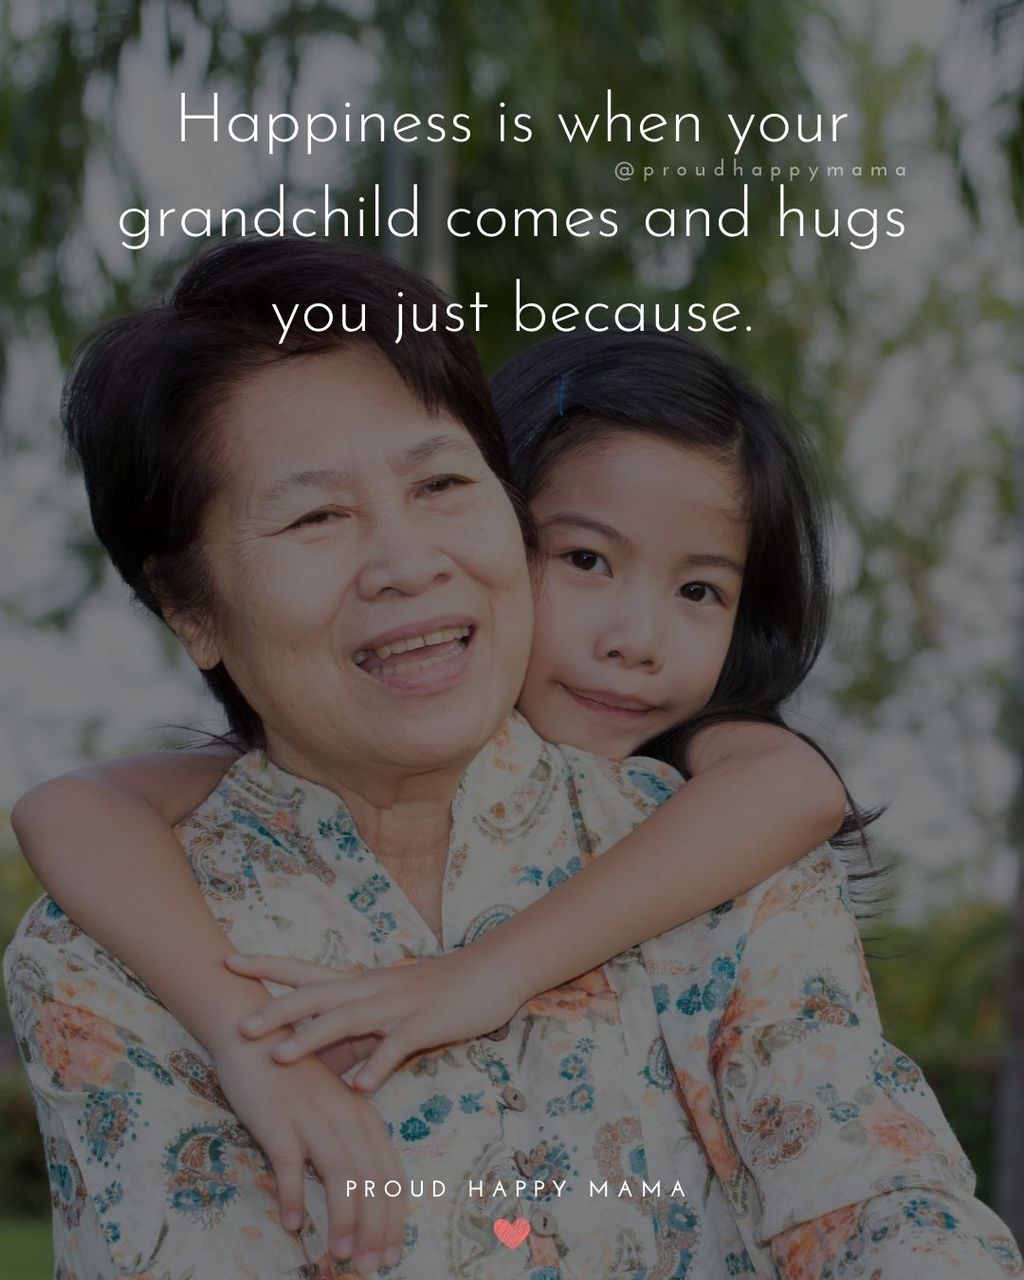 Quotes for Grandchildren - Happiness is when your grandchild comes and hugs you just because.